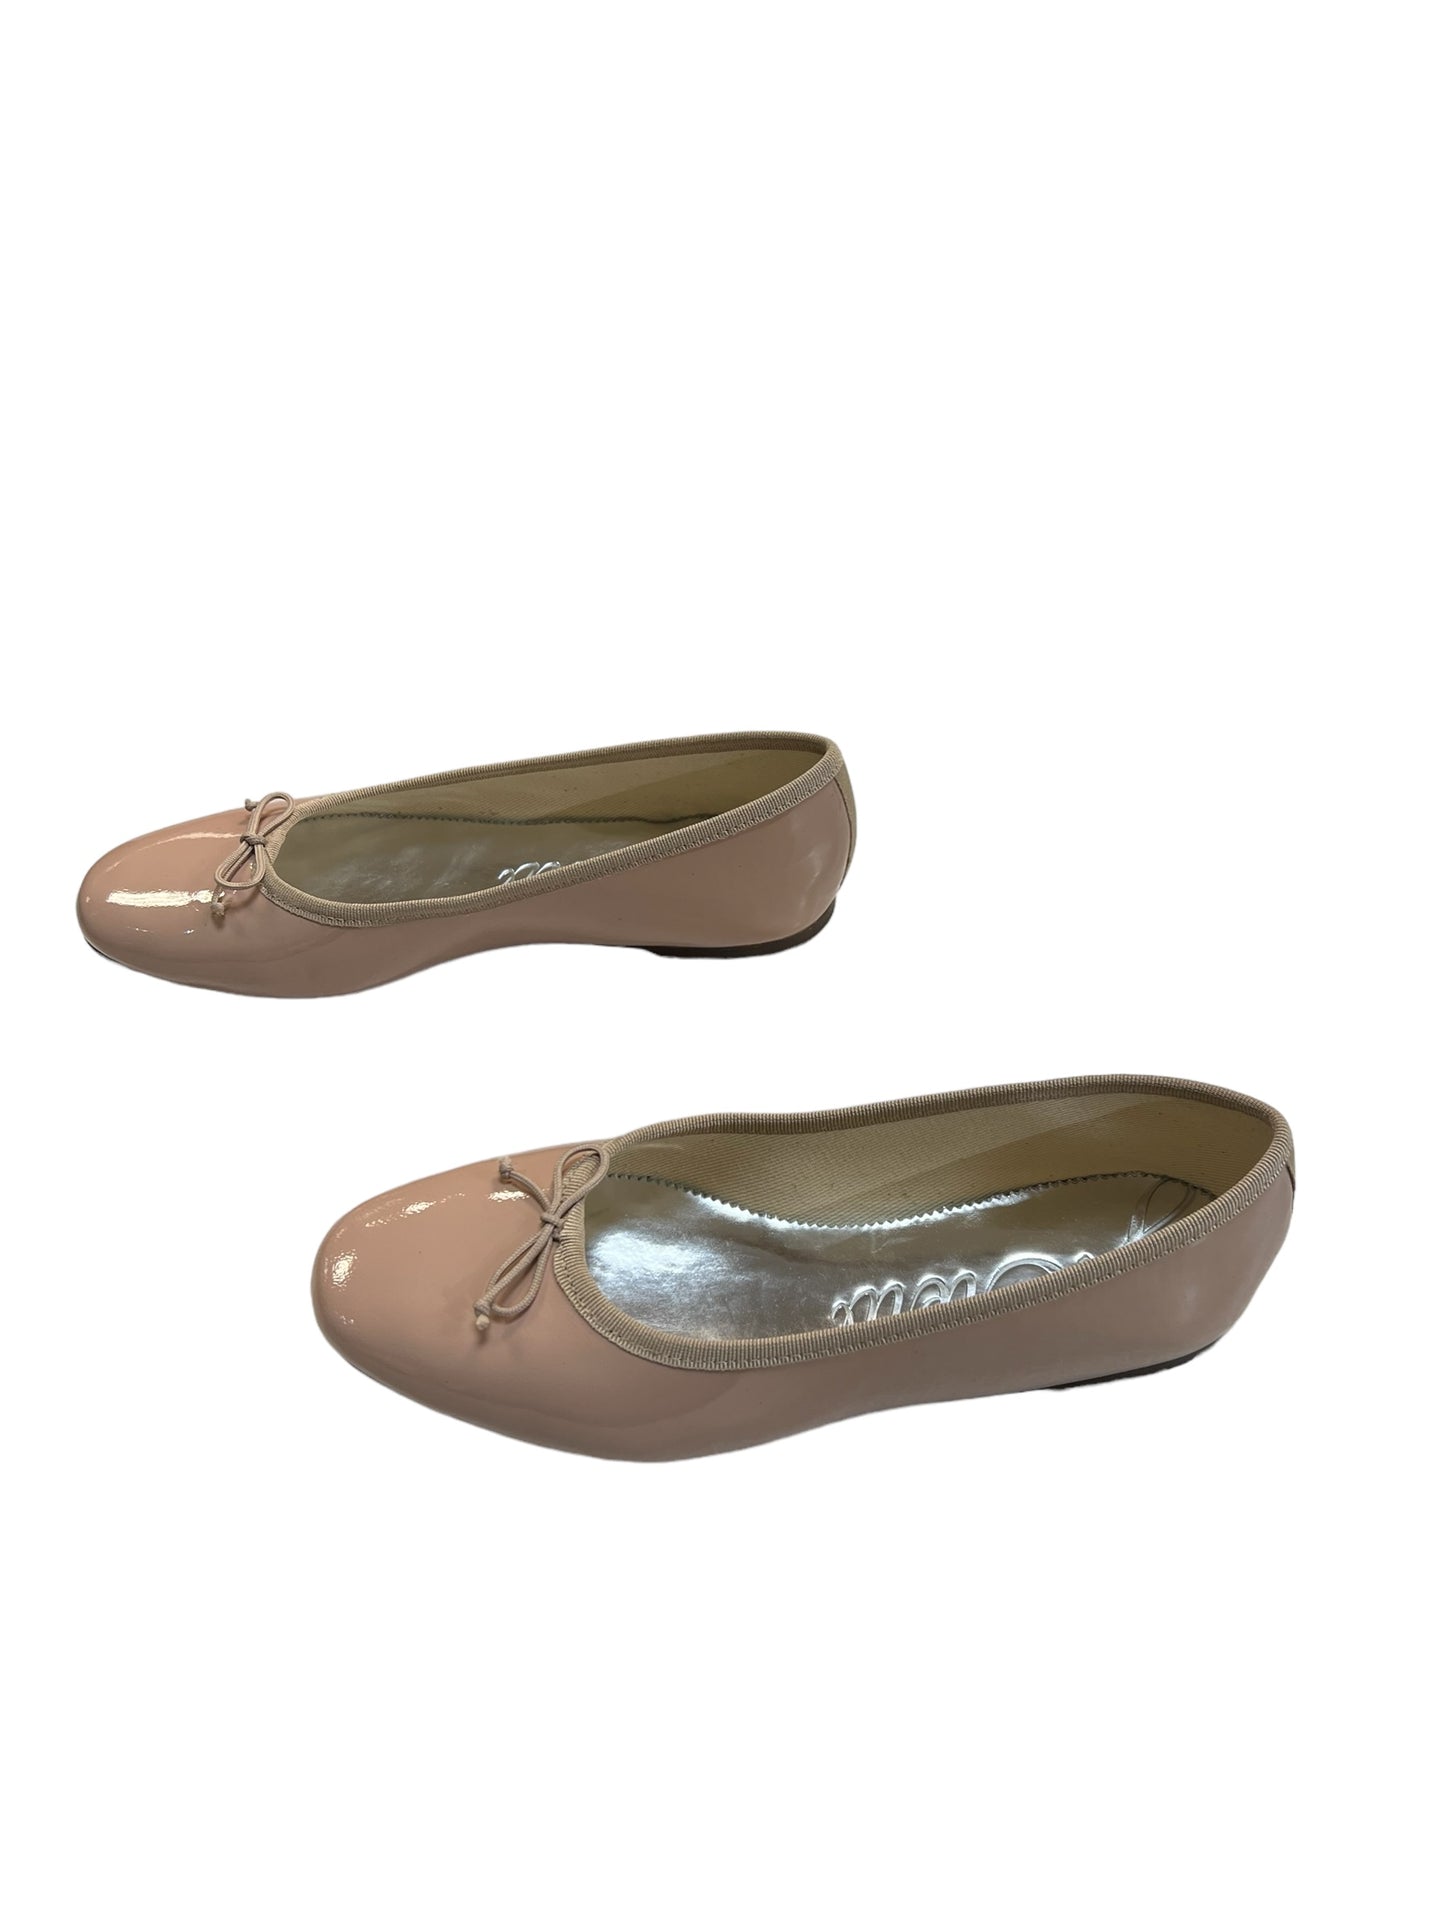 Shoes Flats Ballet By J Crew  Size: 8.5